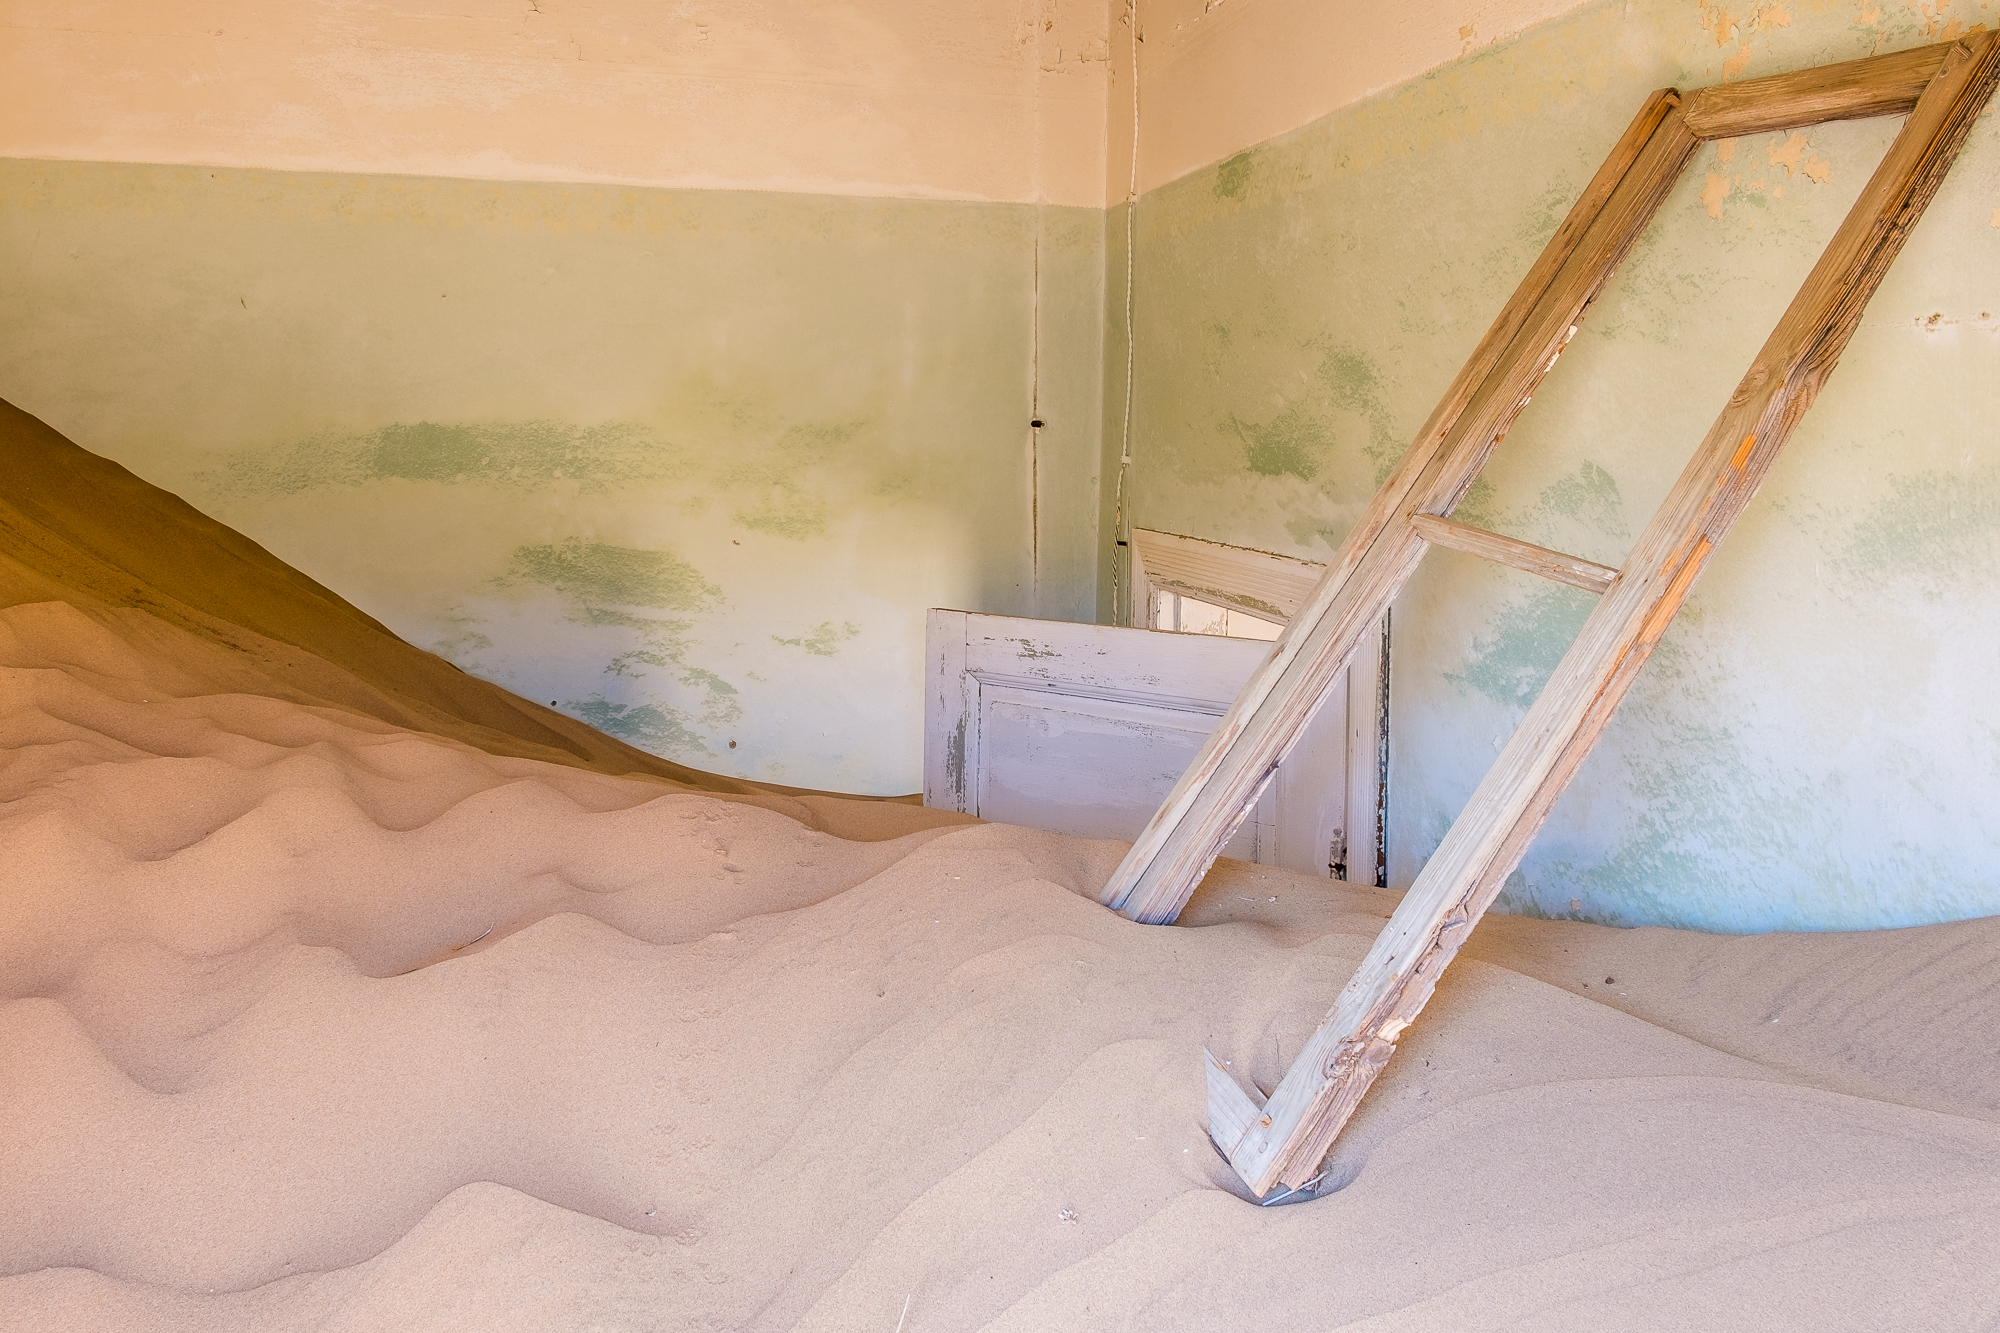 In some buildings, the sand has reached up to the top of door frames